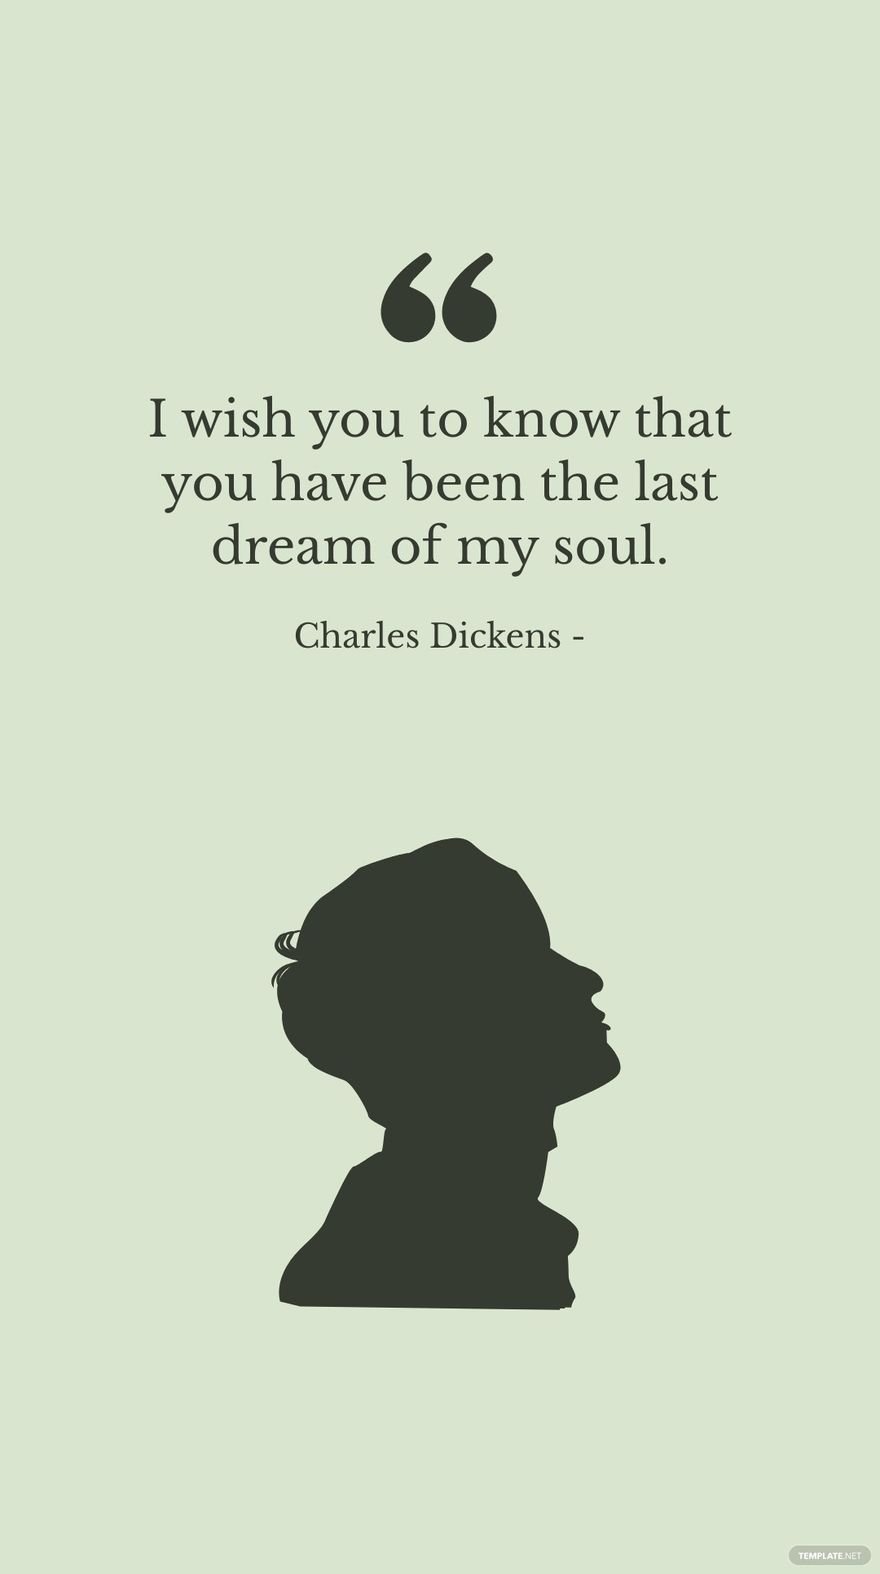 Charles Dickens - I wish you to know that you have been the last dream of my soul.